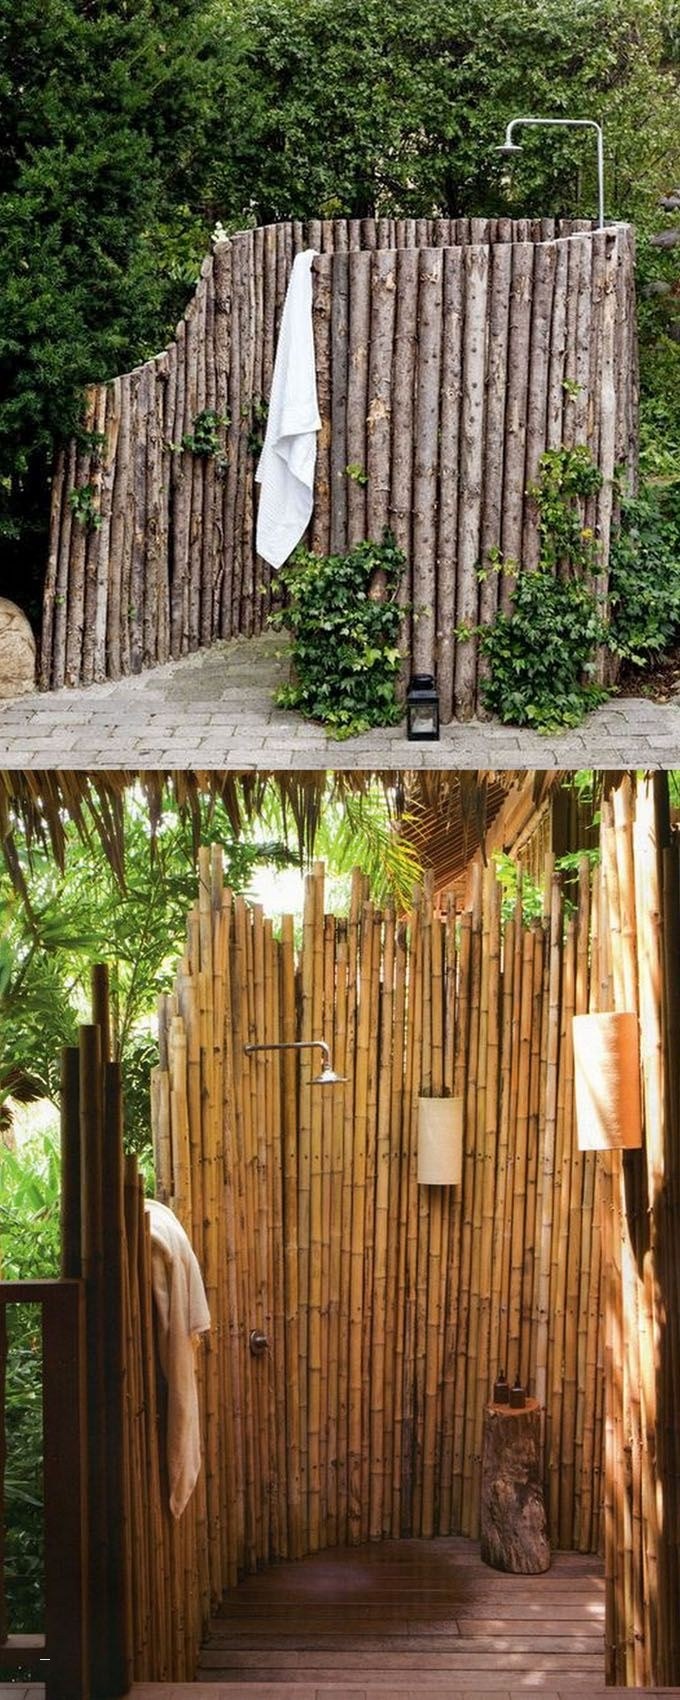 Corrugated Metal Outdoor Shower – Fabulous 32 Beautiful Diy Outdoor Shower Ideas for the Best Summer